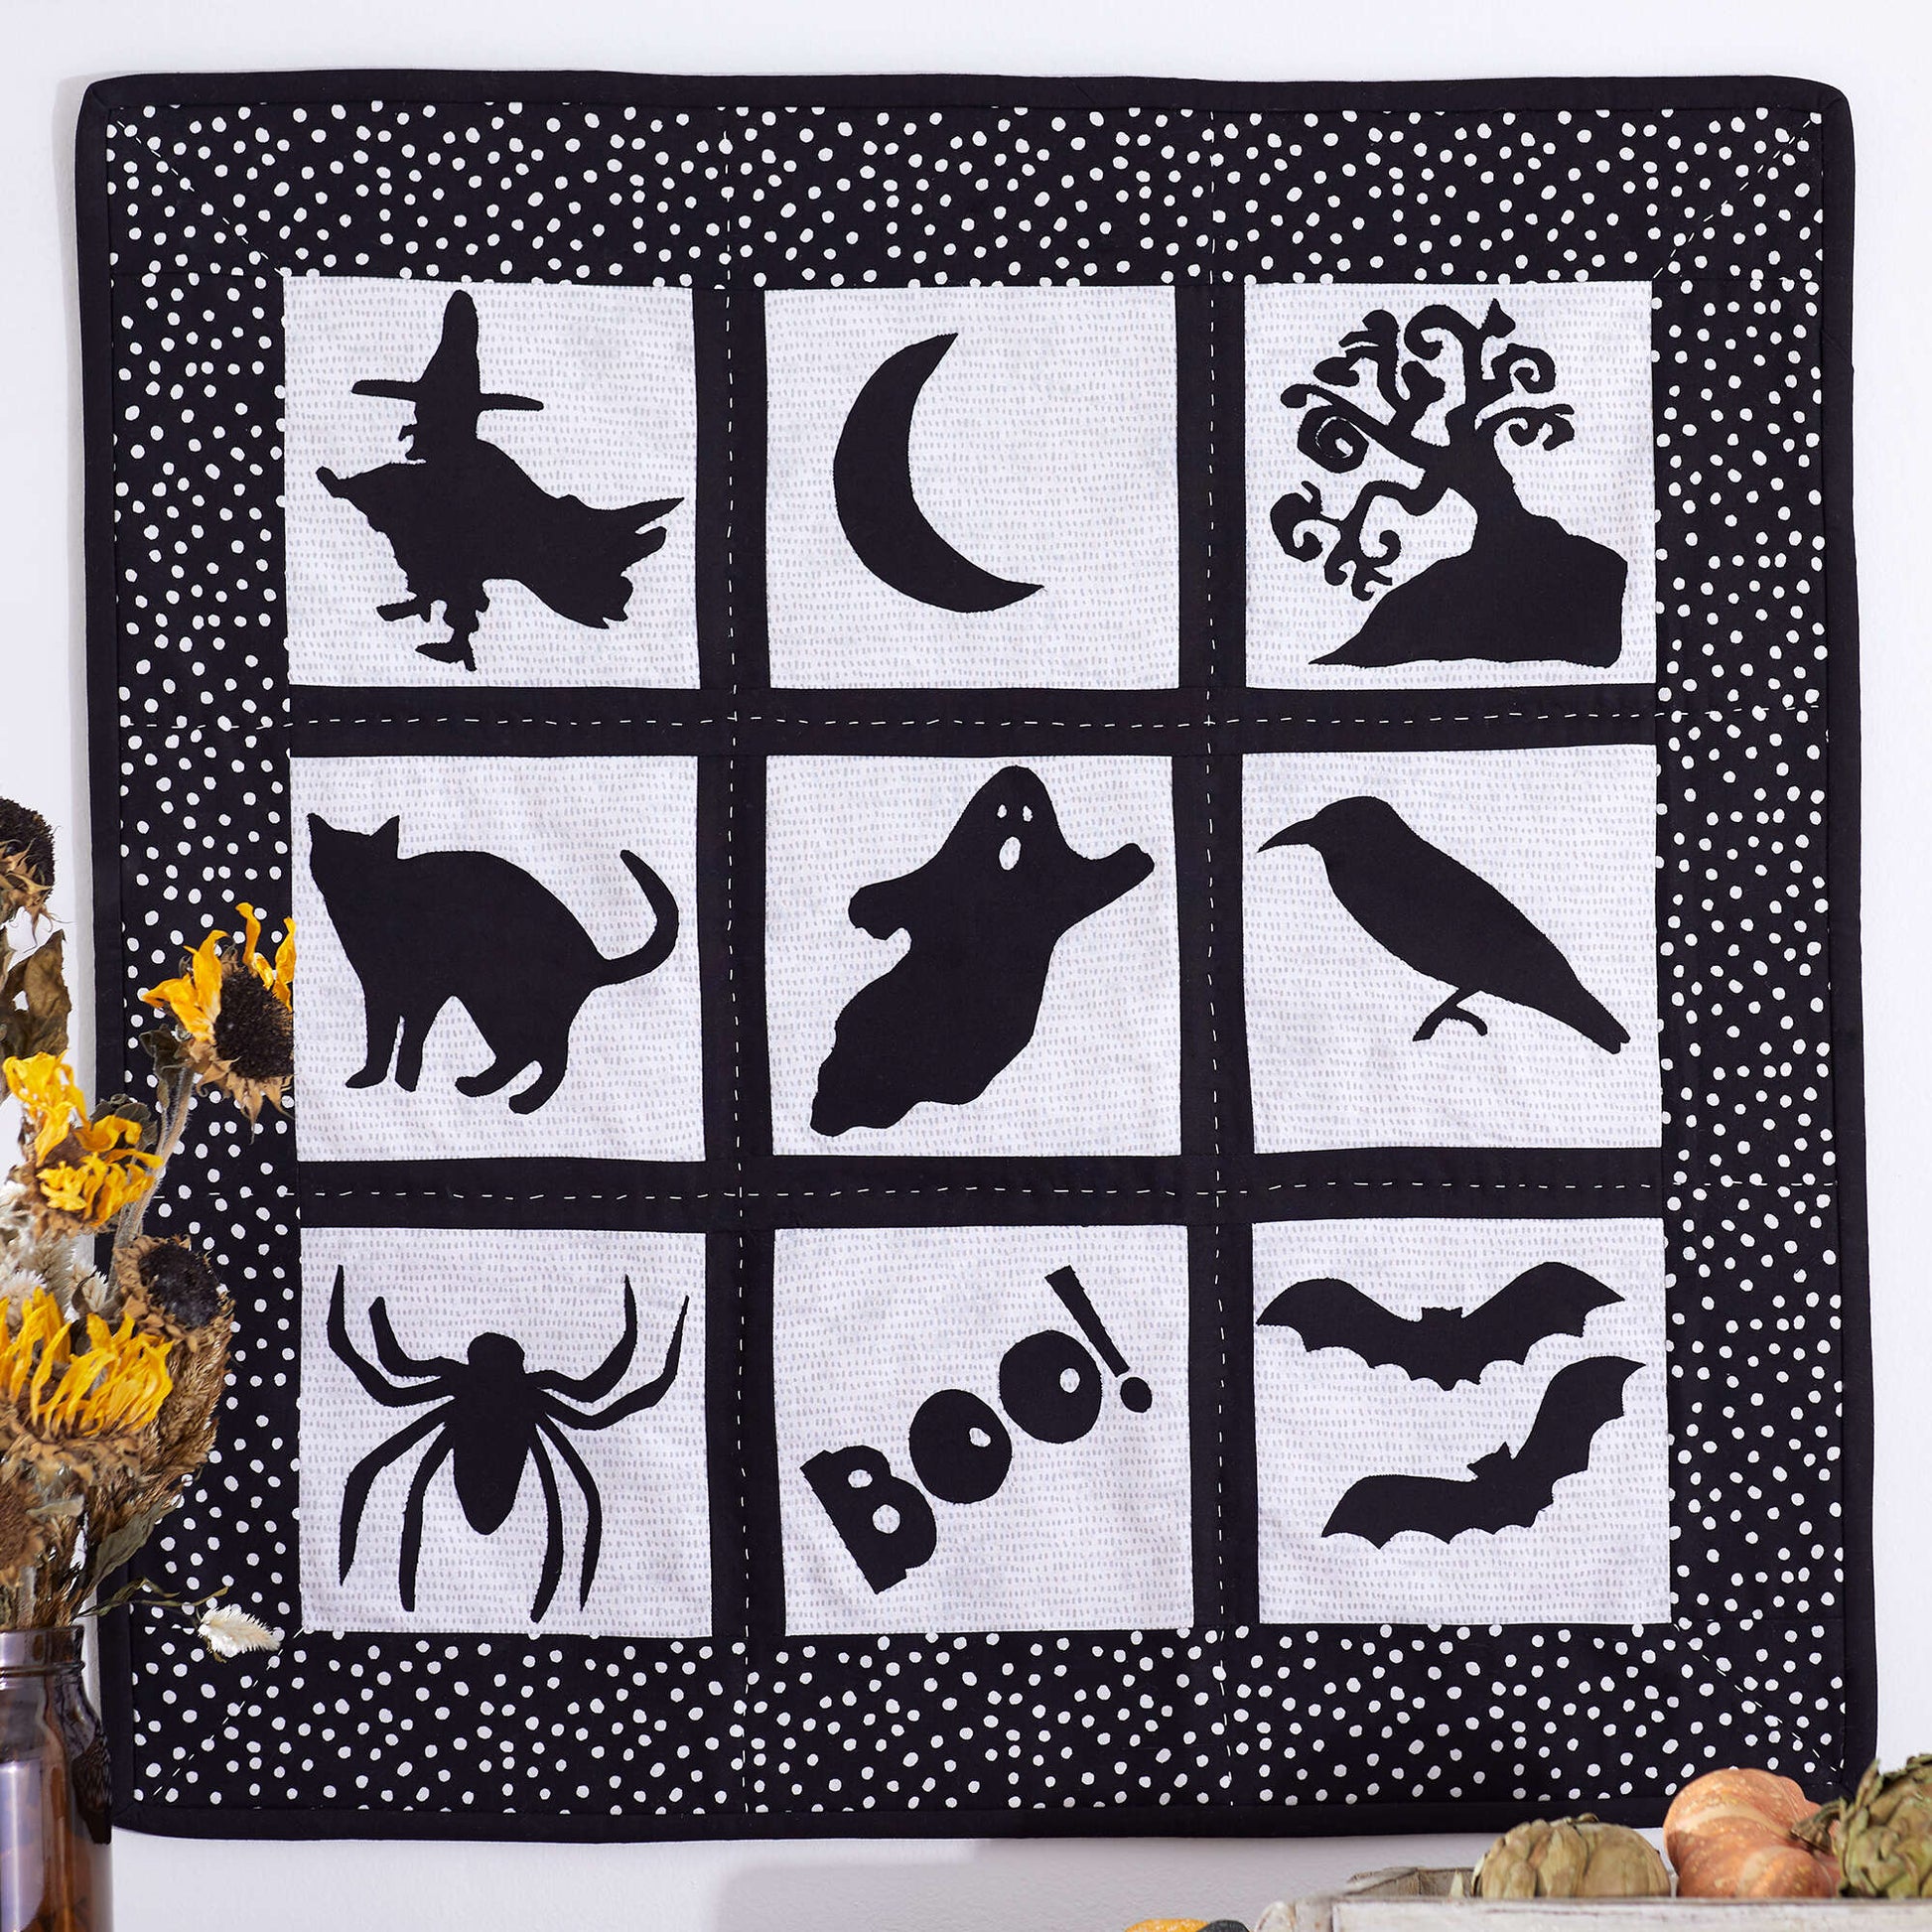 Free Coats & Clark Sewing Halloween Silhouette Quilt Pattern